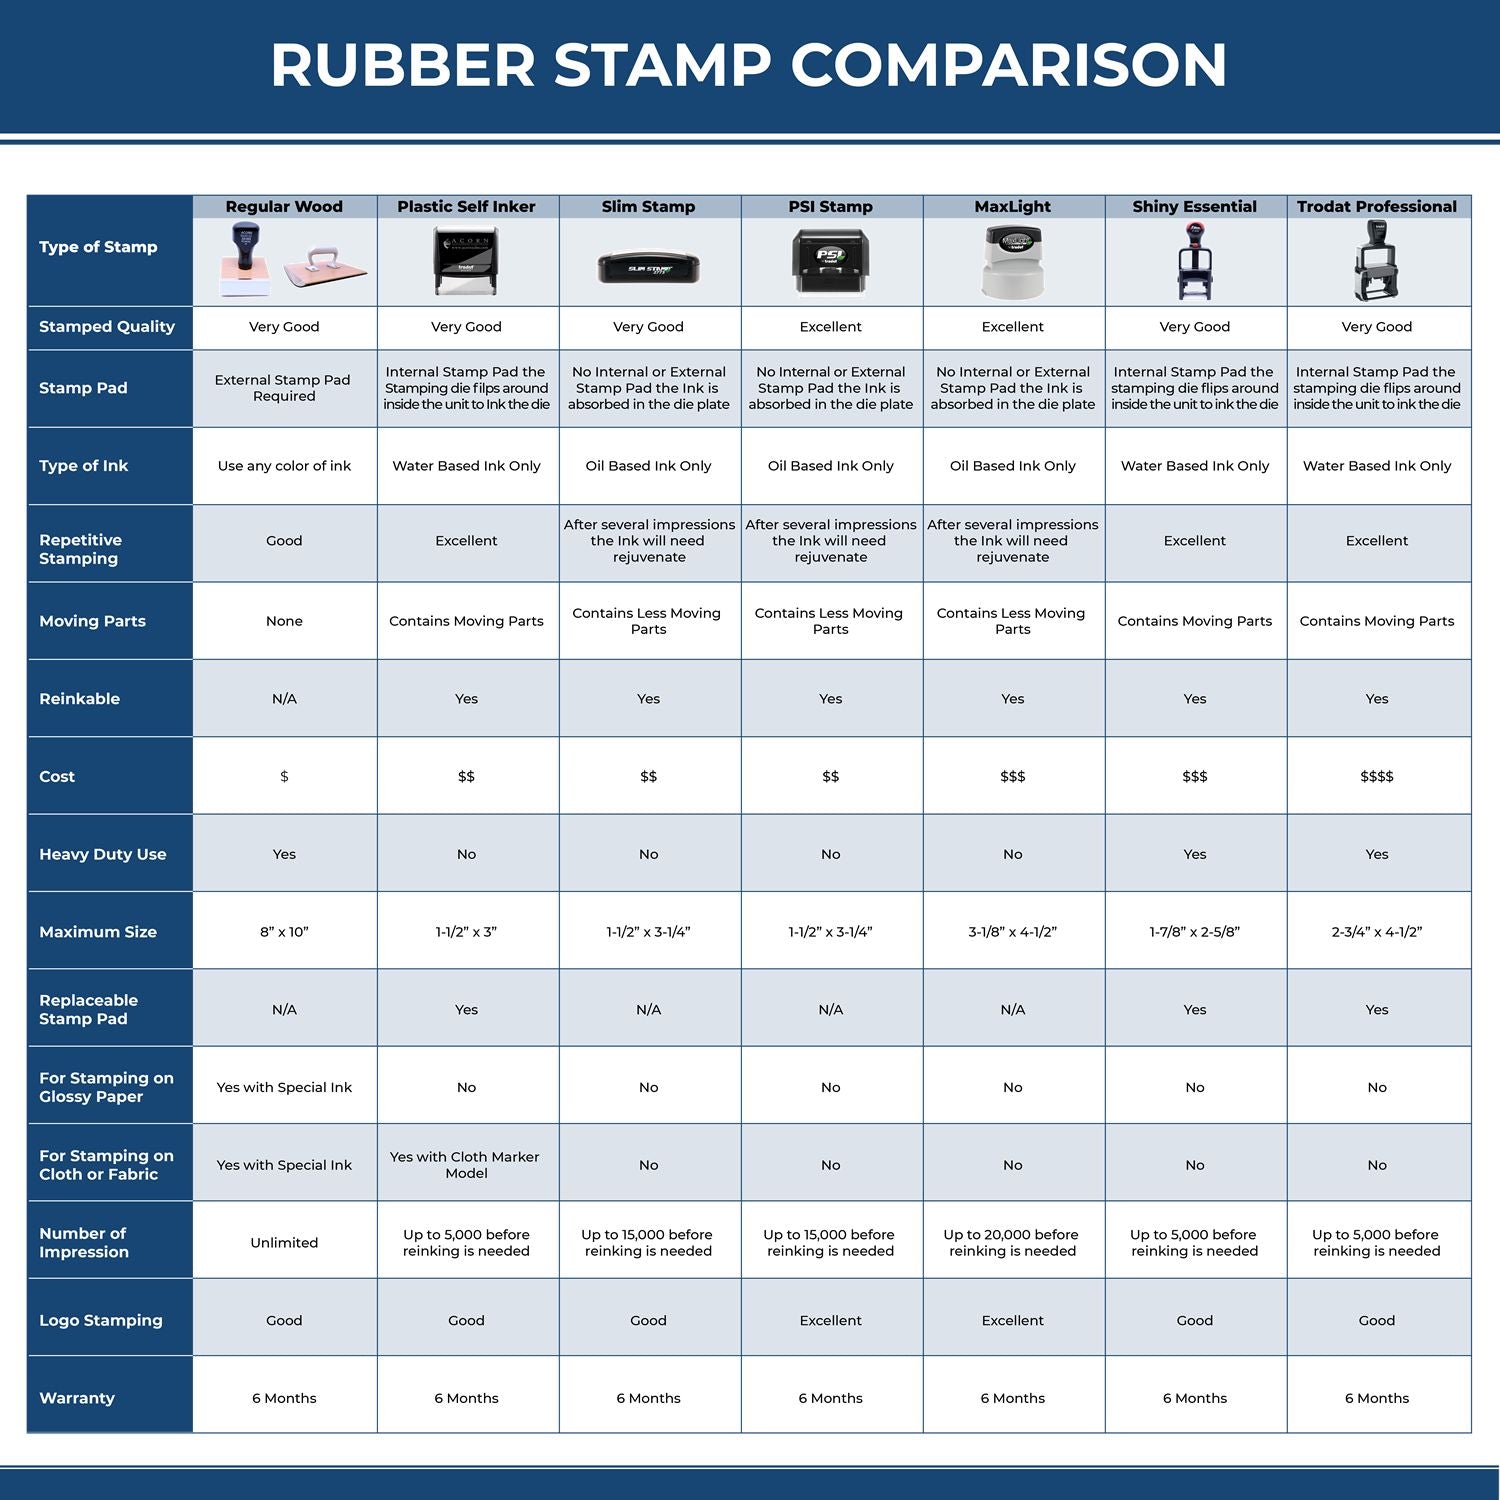 Large Self-Inking Duplicado Stamp 5528S Rubber Stamp Comparison